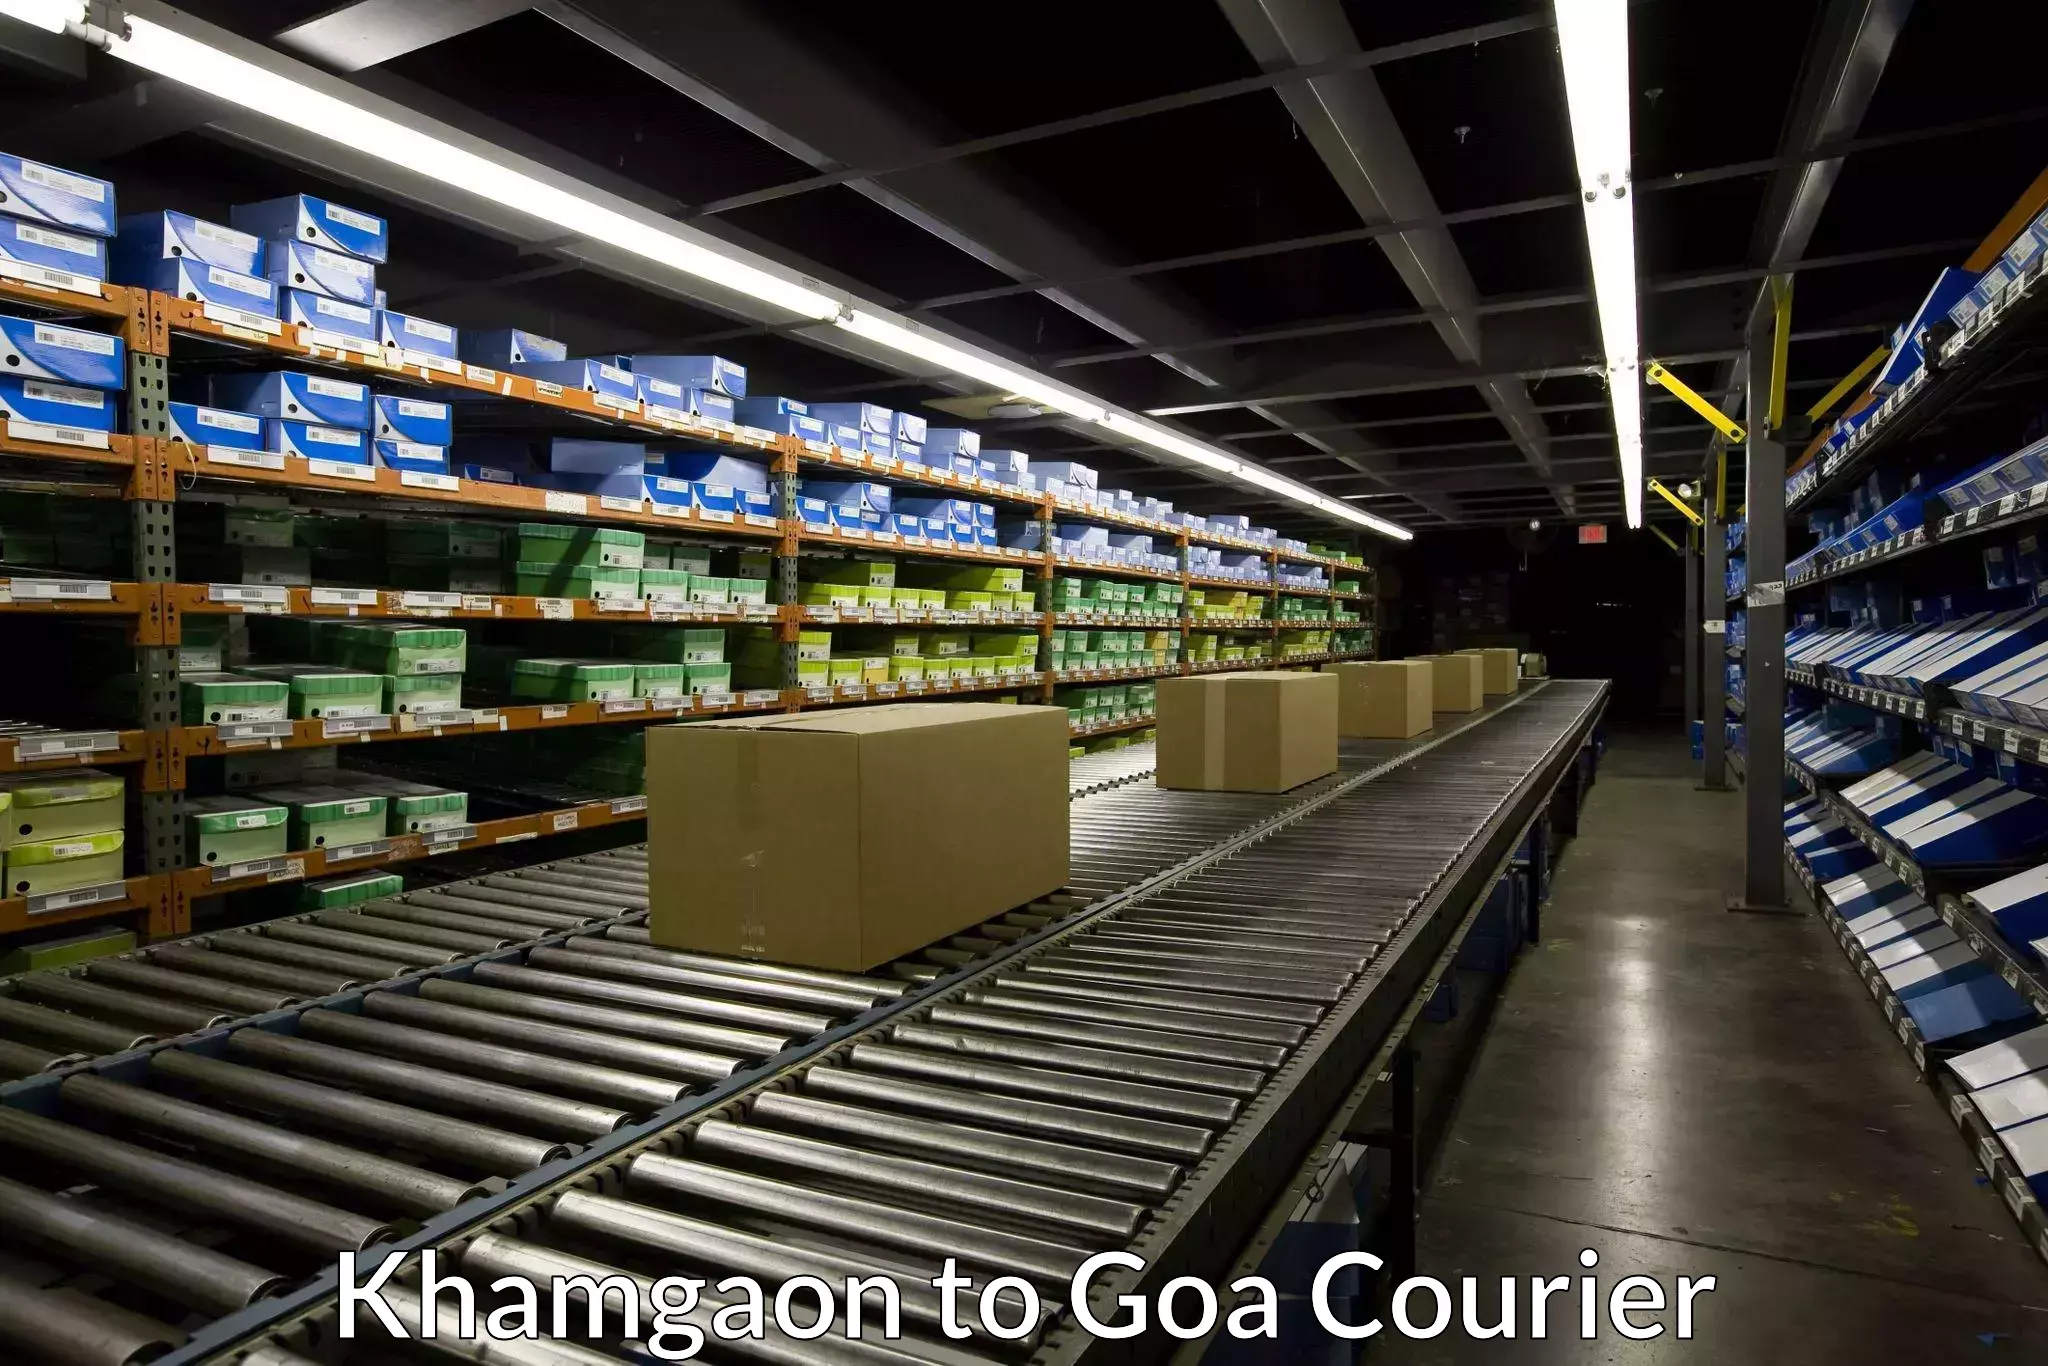 Seamless shipping experience in Khamgaon to South Goa